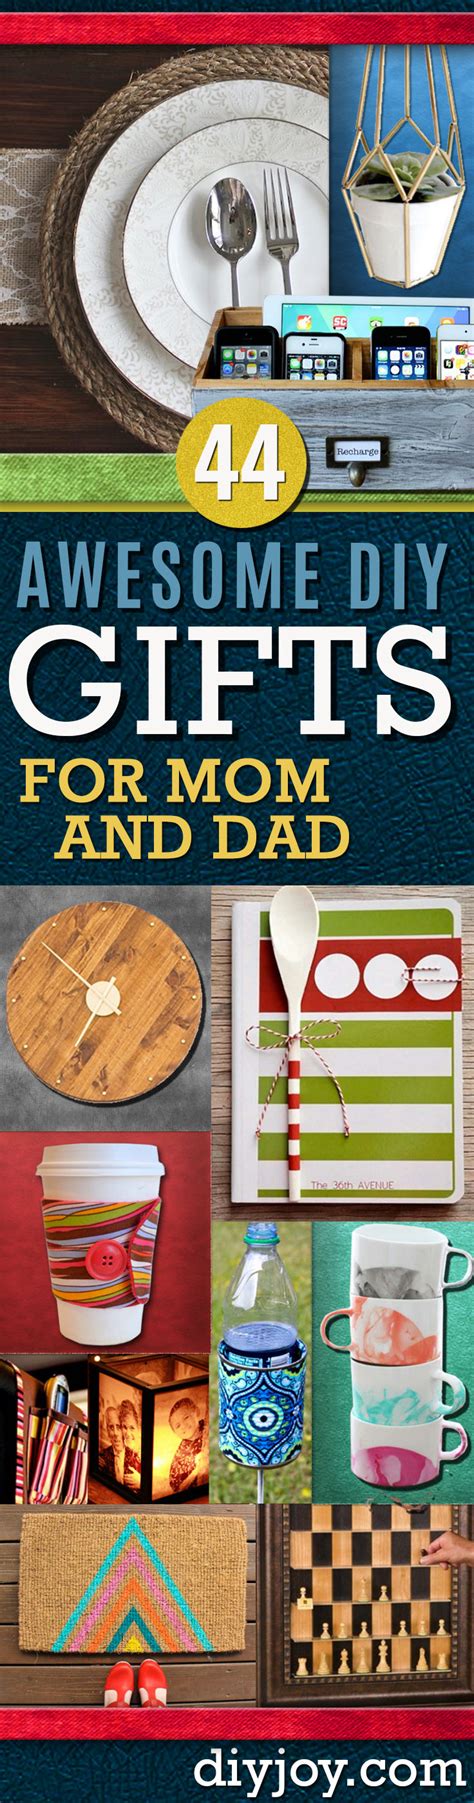 They seem to have everything and want nothing. Awesome DIY Gift Ideas Mom and Dad Will Love